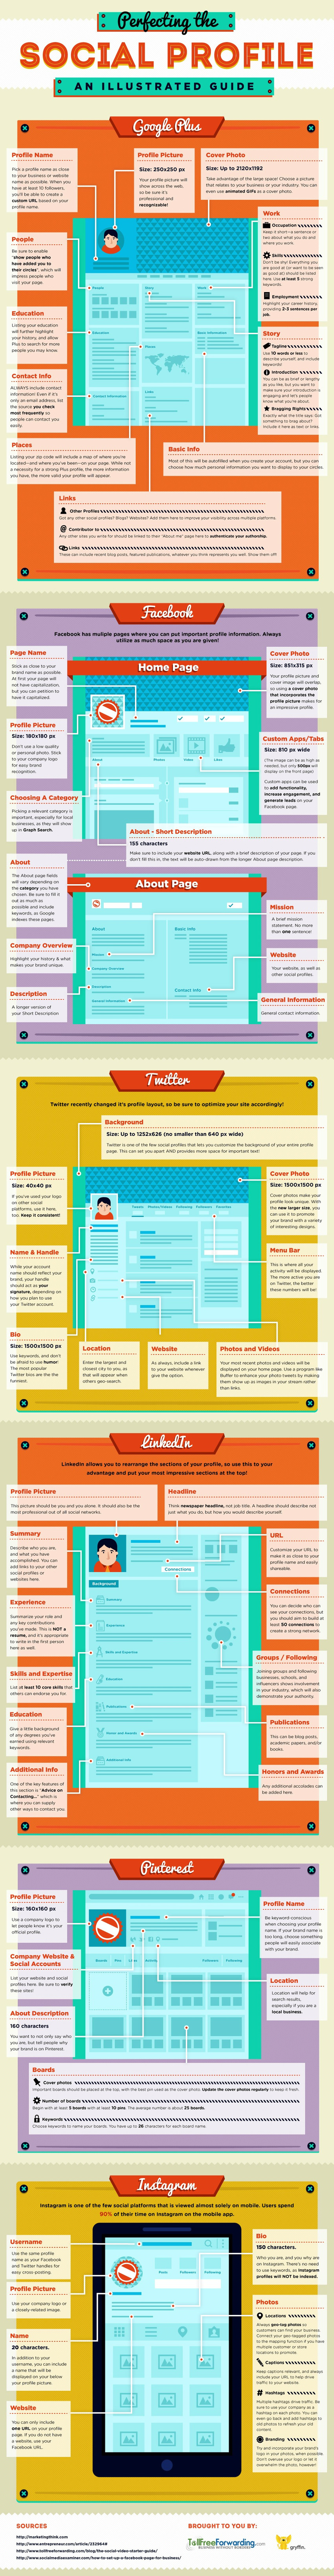 Facebook, Google+, Twitter, etc. - Perfecting Your Social Media Profiles - #infographic | The MarTech Digest | Scoop.it